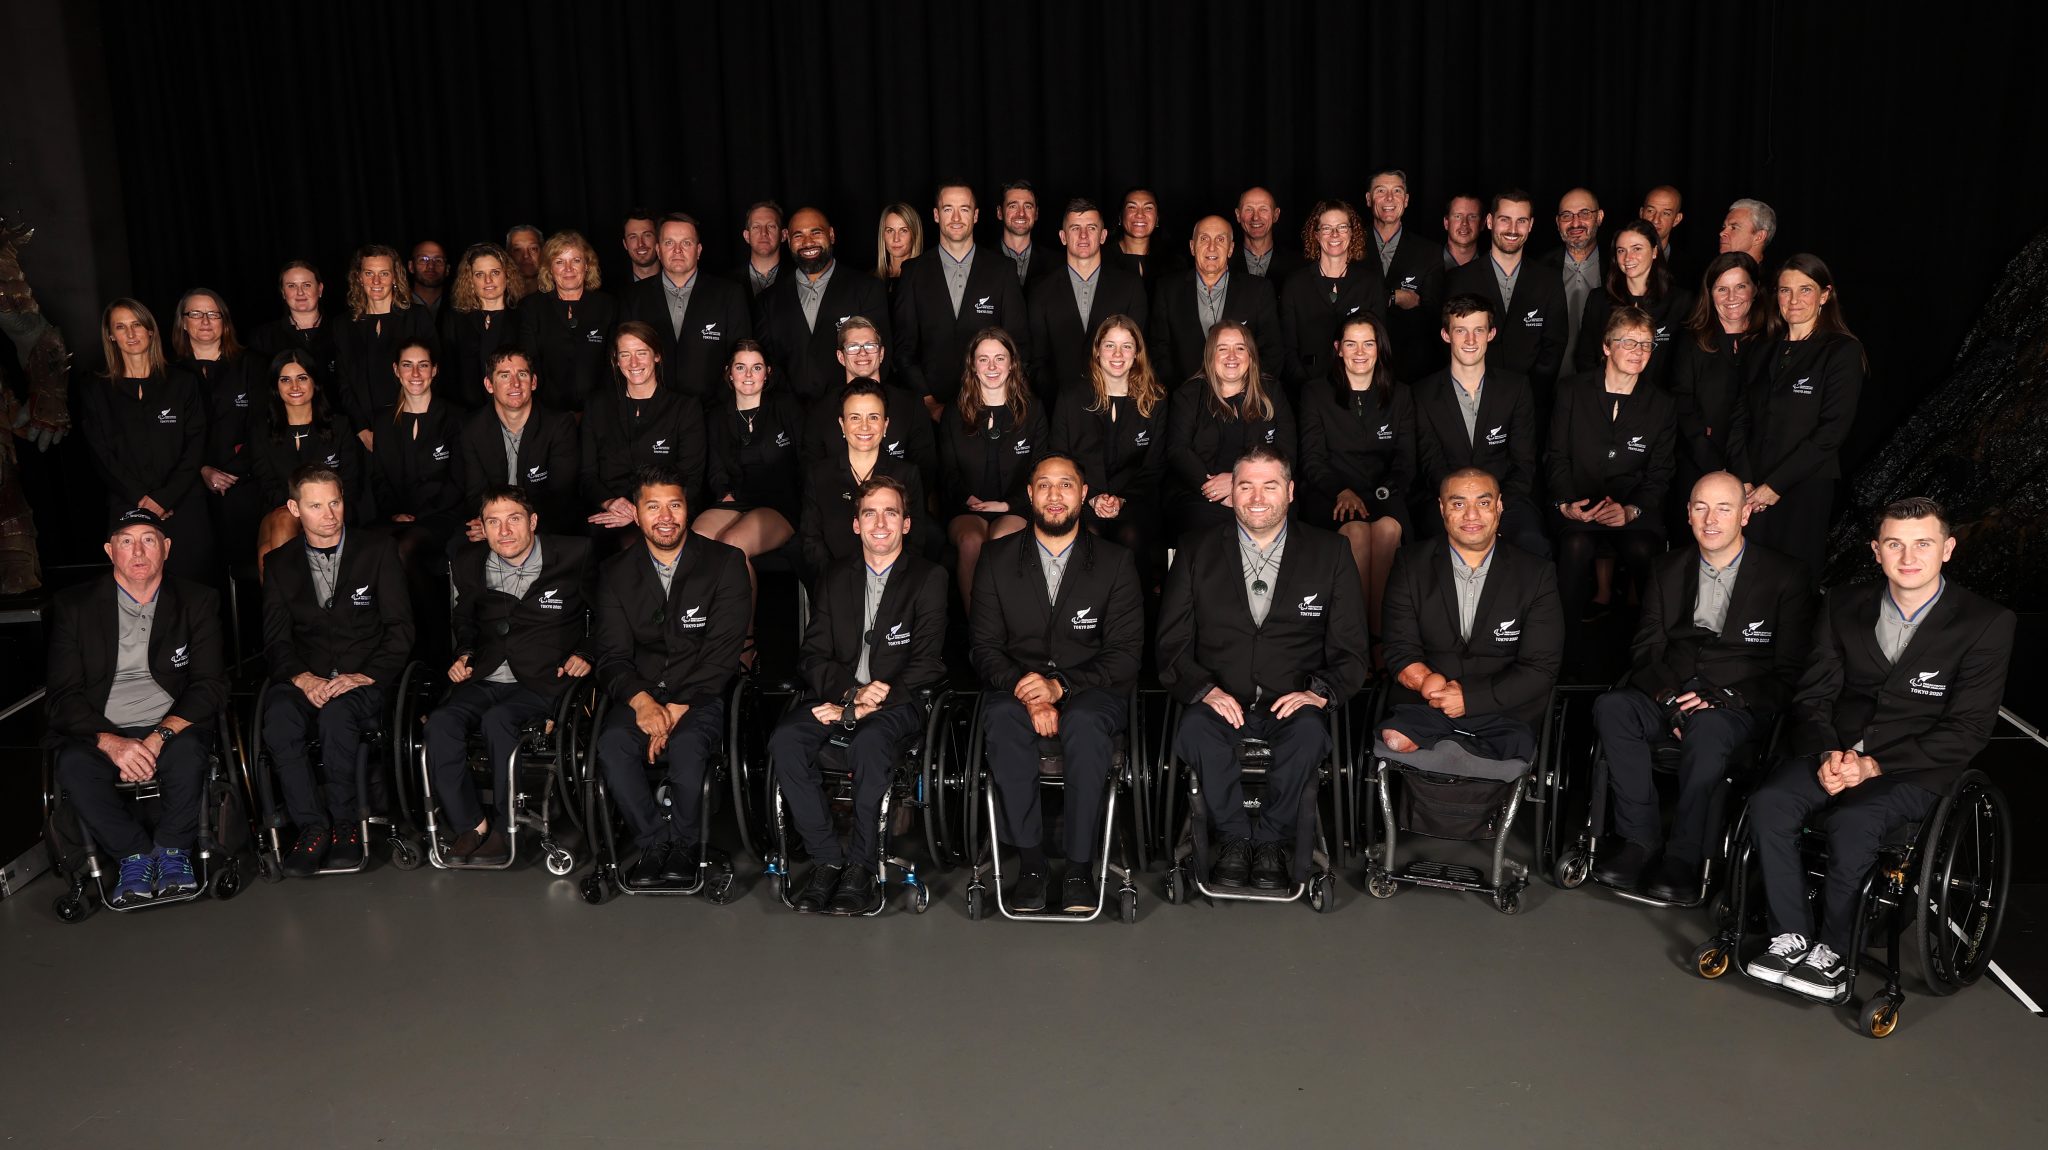 Tokyo 2020 Paralympic Team group photo